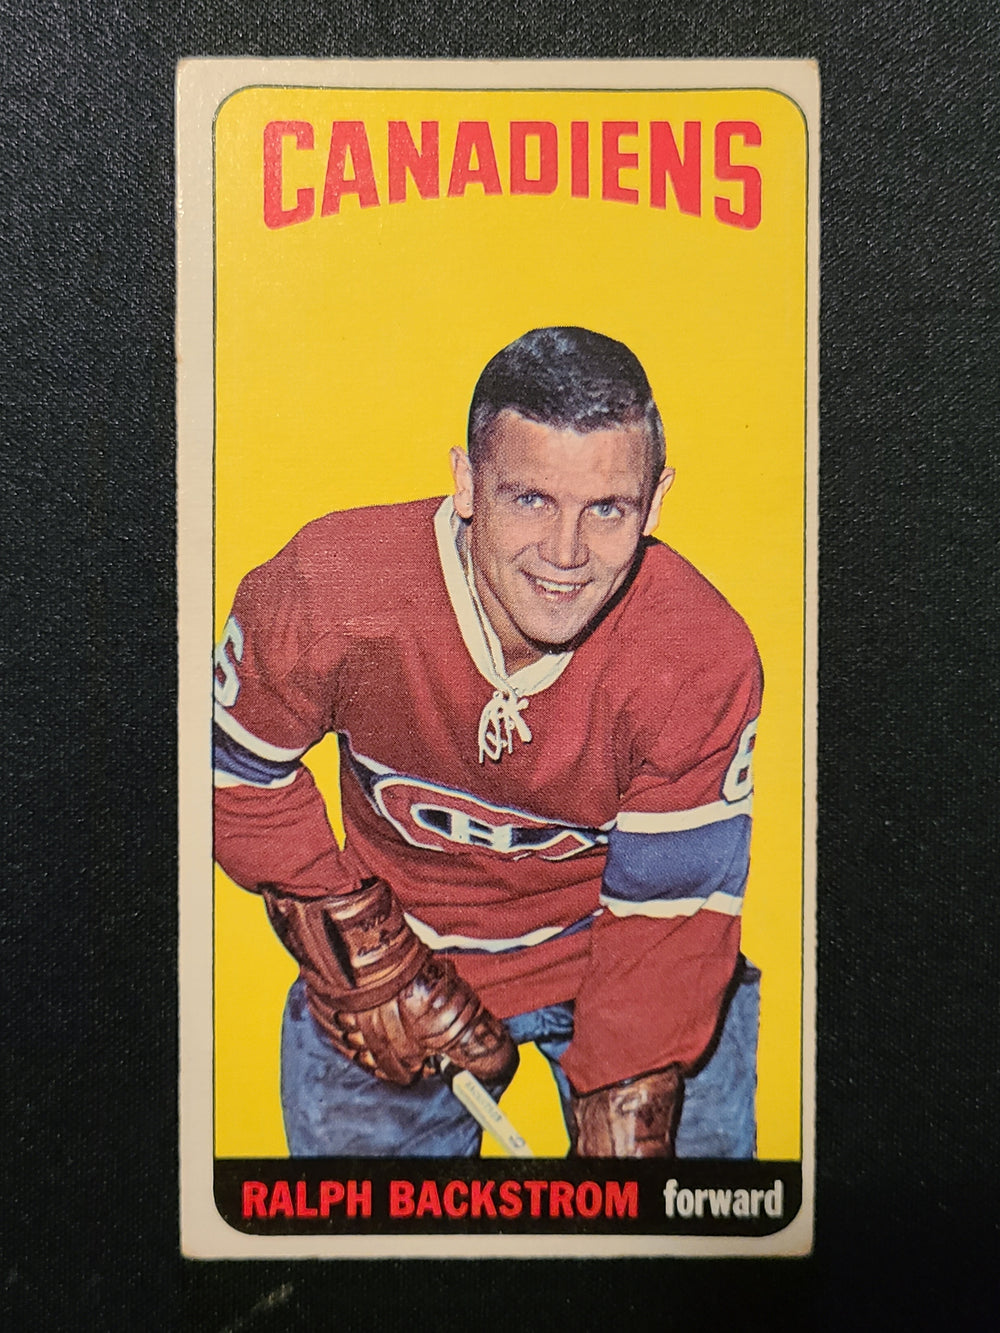 1964-65 Topps Tallboys #78 Ralph Backstrom Montreal Canadiens **See Photos for Condition